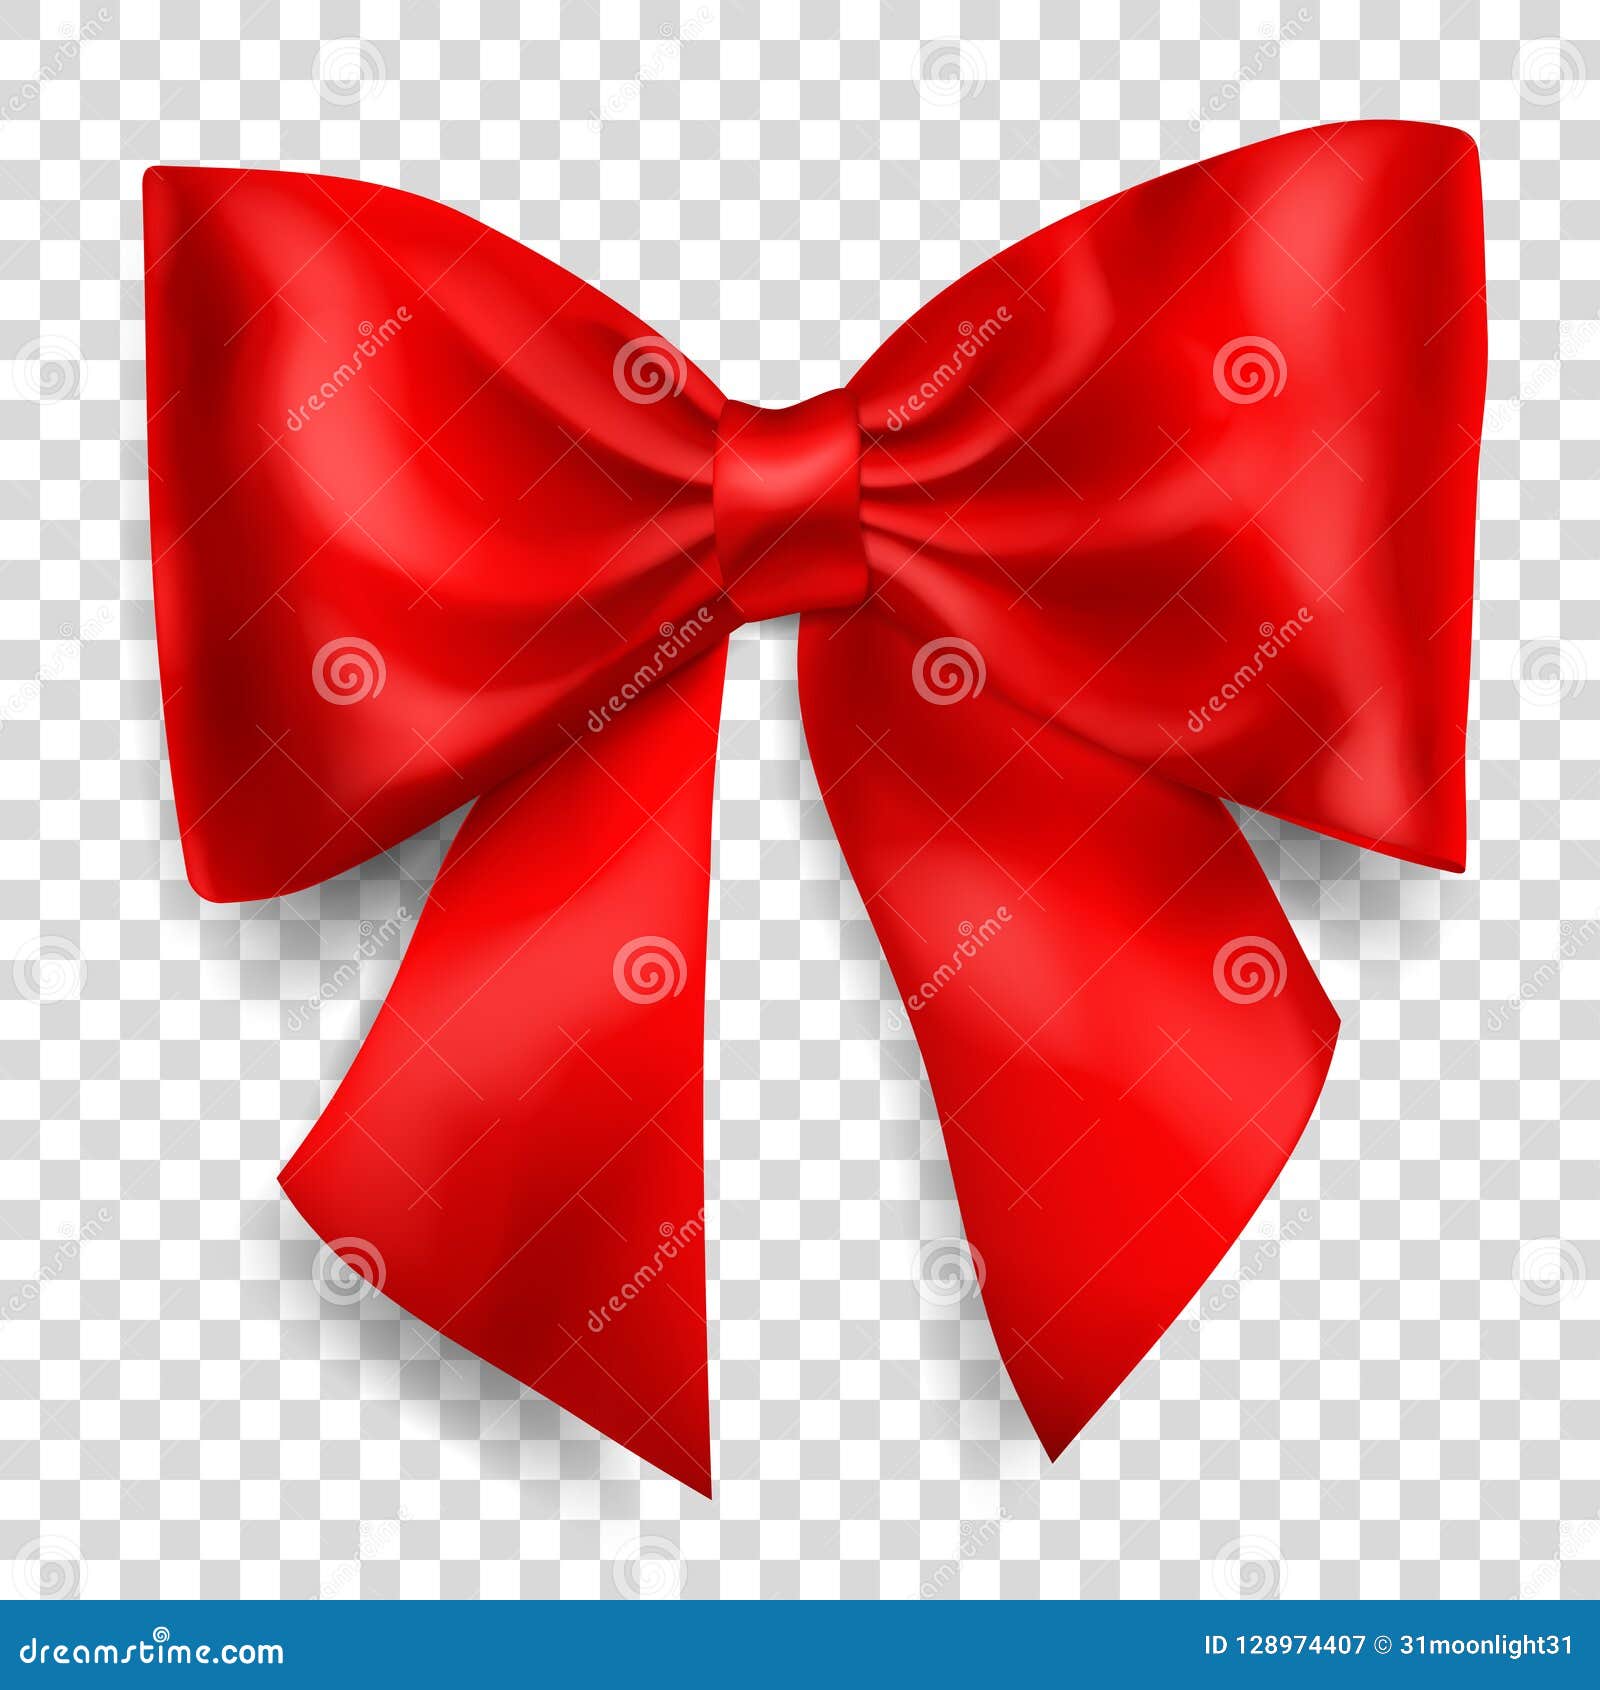 Xmas red ribbon bow white background Royalty Free Vector